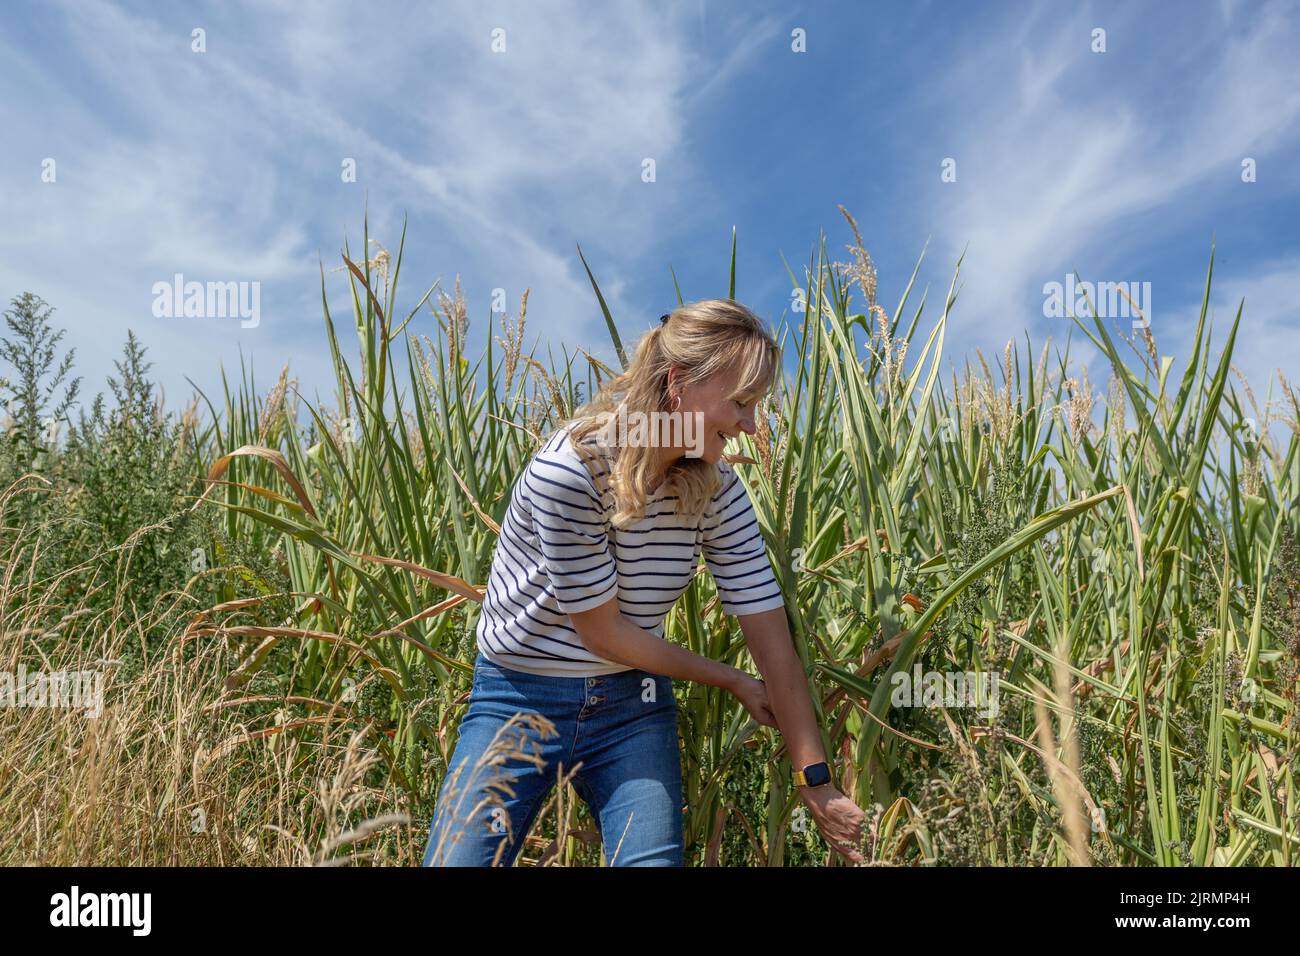 A blond woman pulling out corn on the corn field. Stock Photo